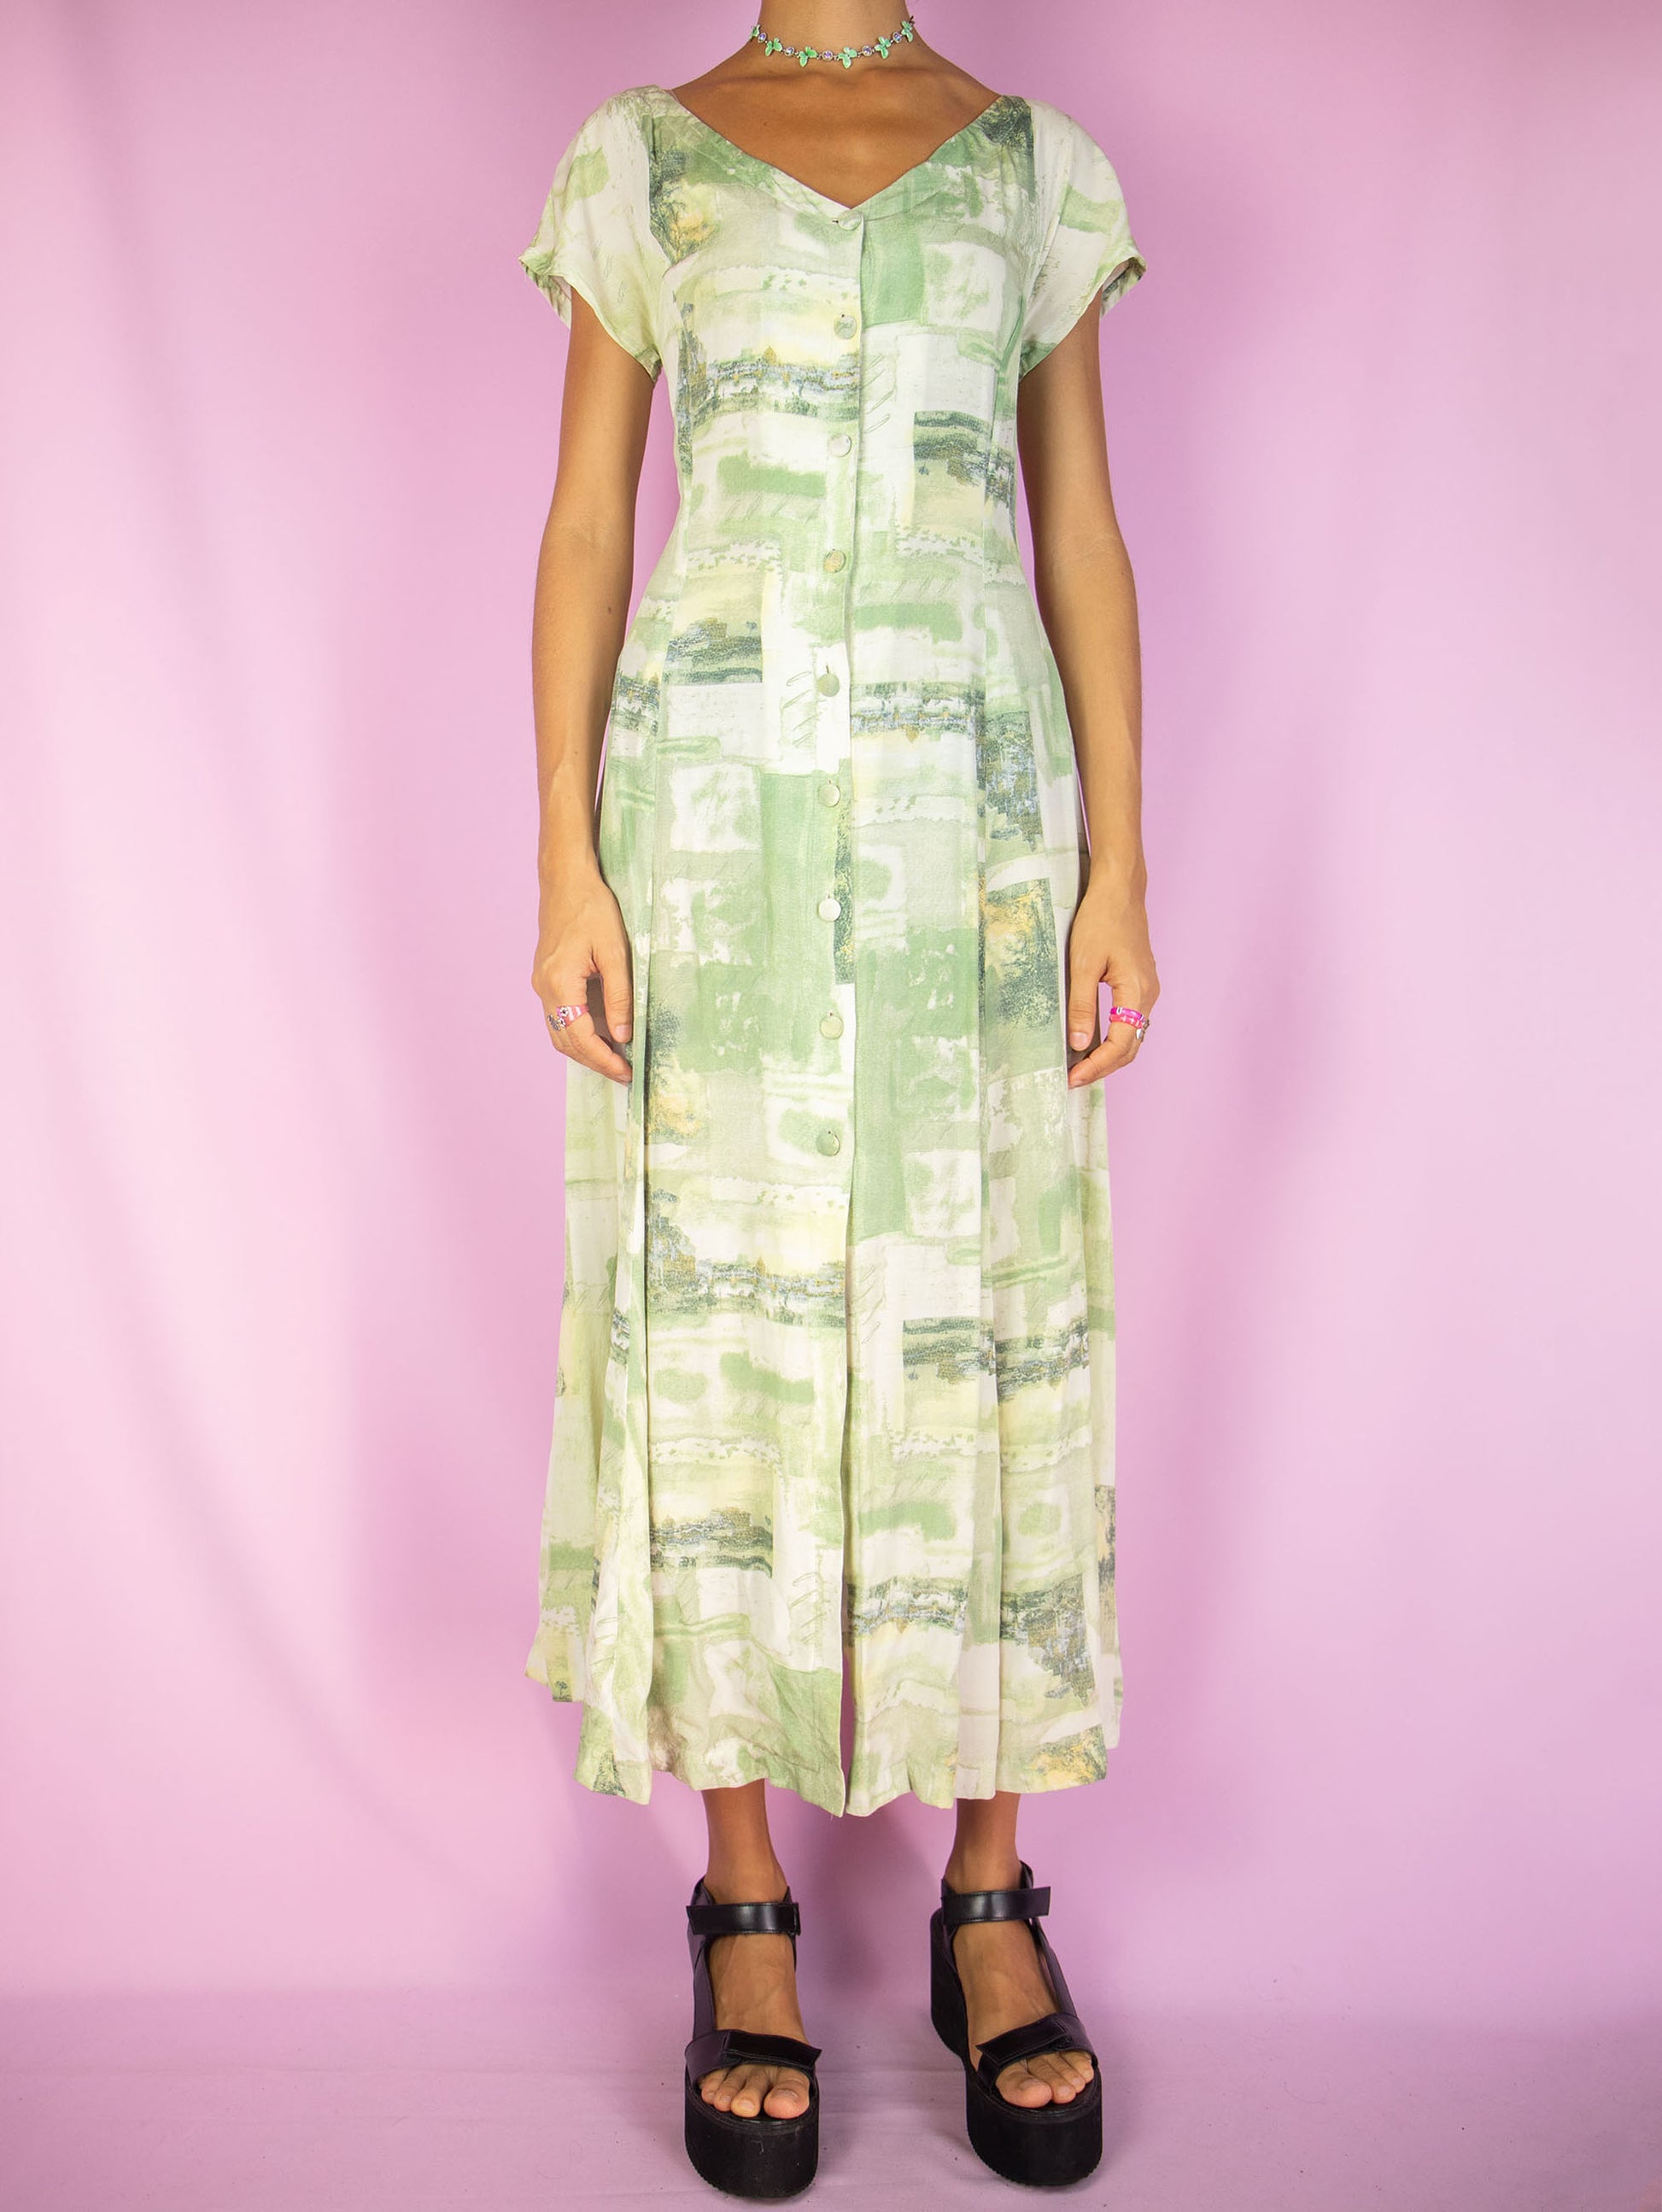 The Vintage 90s Boho Abstract Midi Dress is a green and white abstract short sleeve button down flared dress. Retro summer 1990s graphic maxi dress.